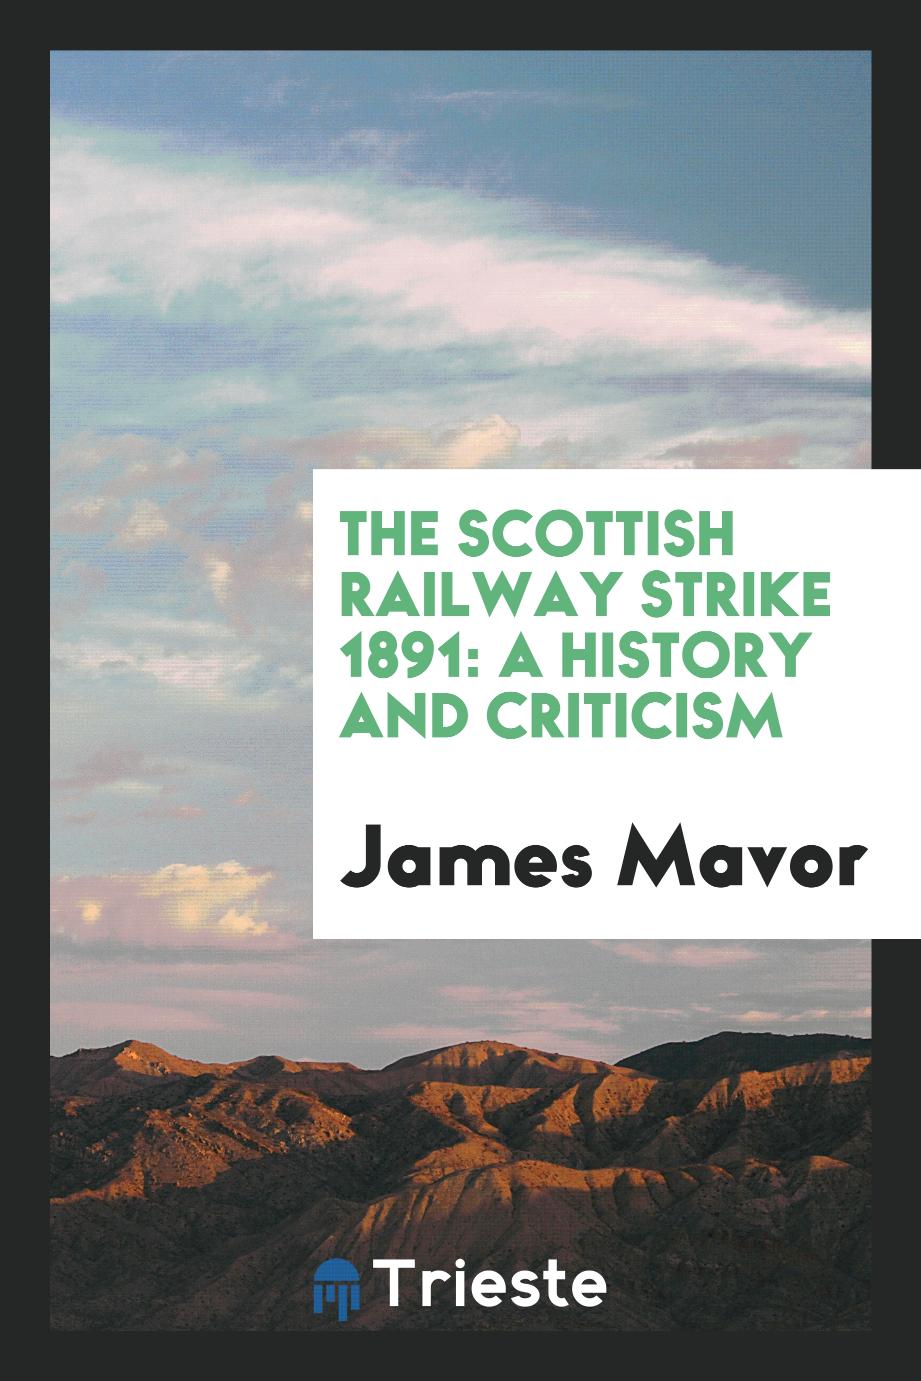 The Scottish Railway Strike 1891: A History and Criticism